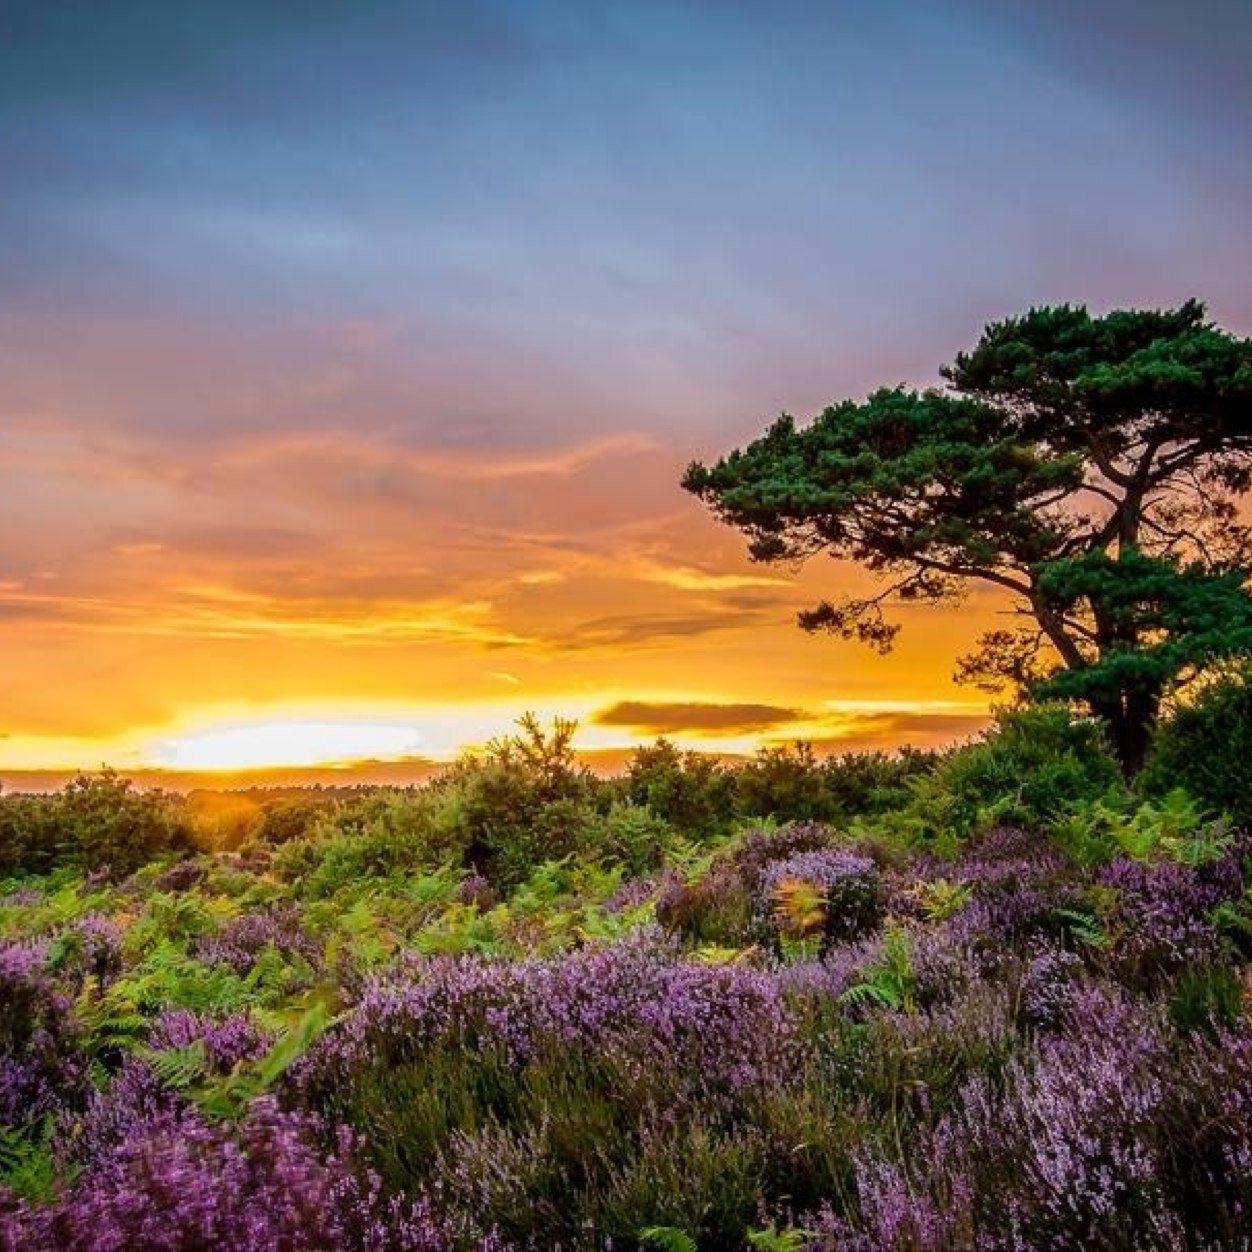 A page for all to share gorgeous landscape images of the county of Hampshire. Please include #HampshireLandscapes on your photos. Run by @kingkevb